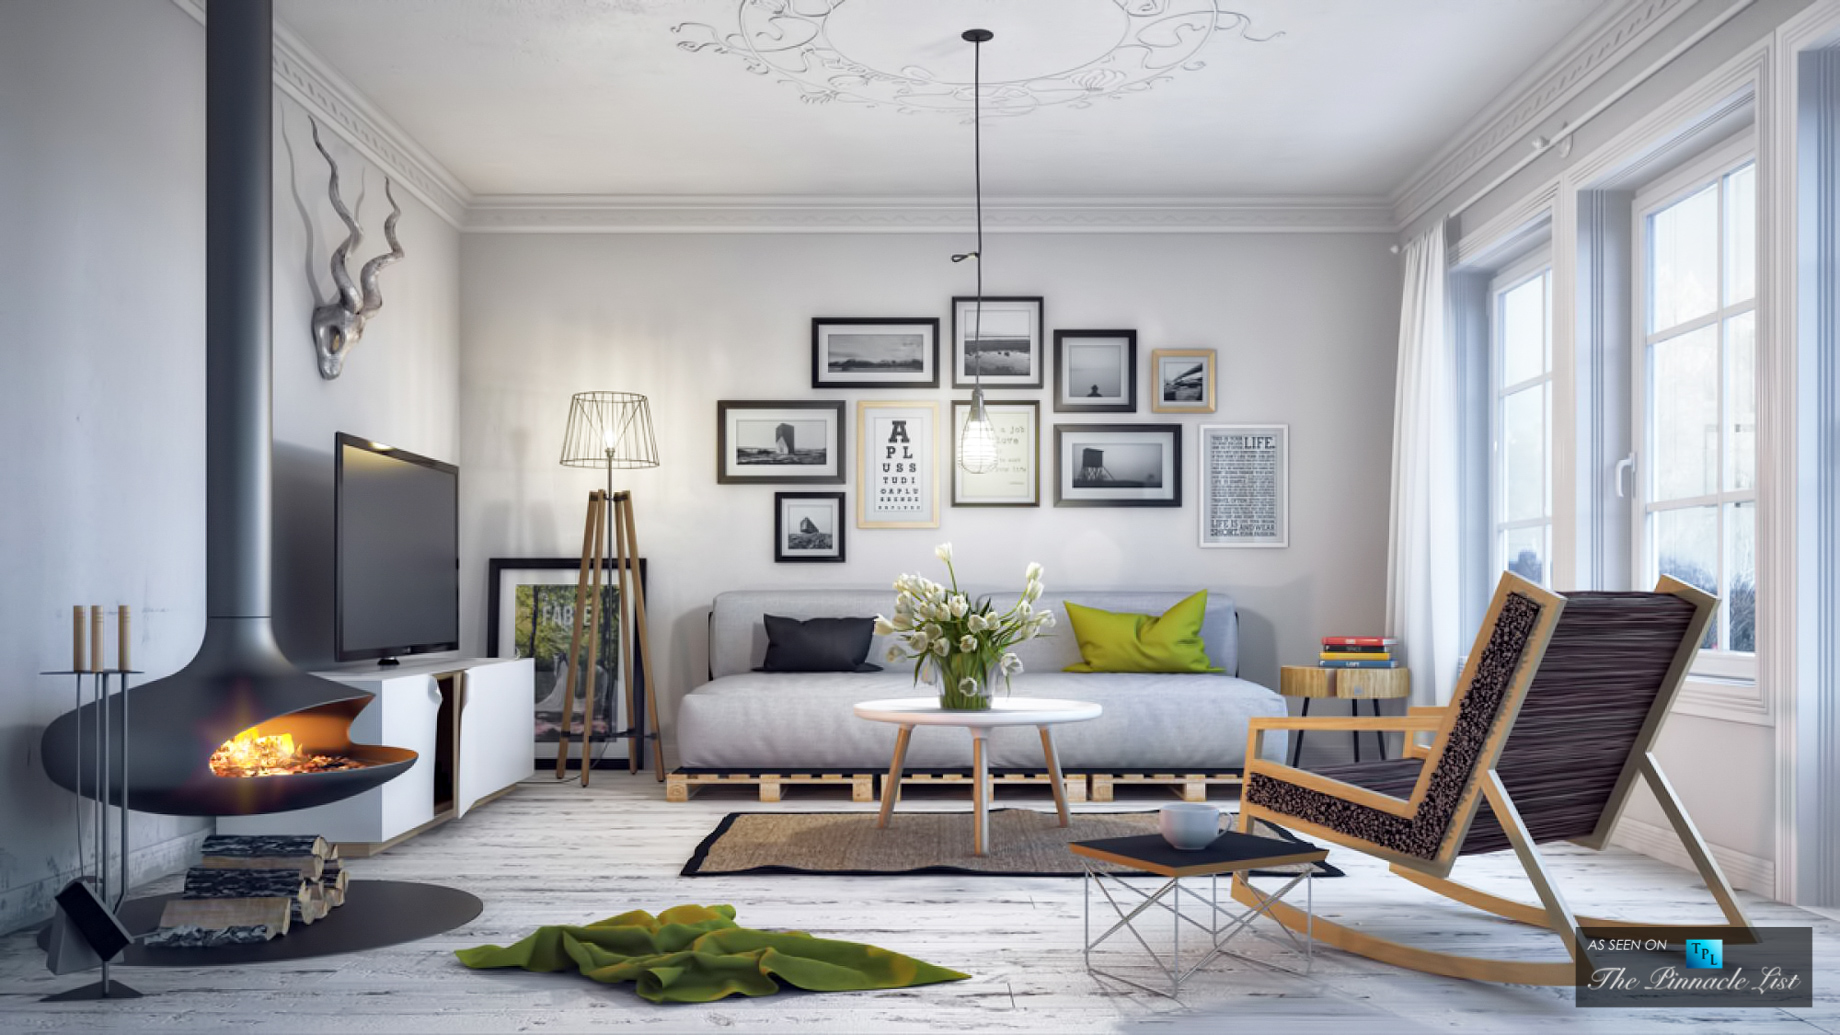 Cozying It Up Is Making It Easier – Top 6 Home Renovation Trends To Lookout For This Year